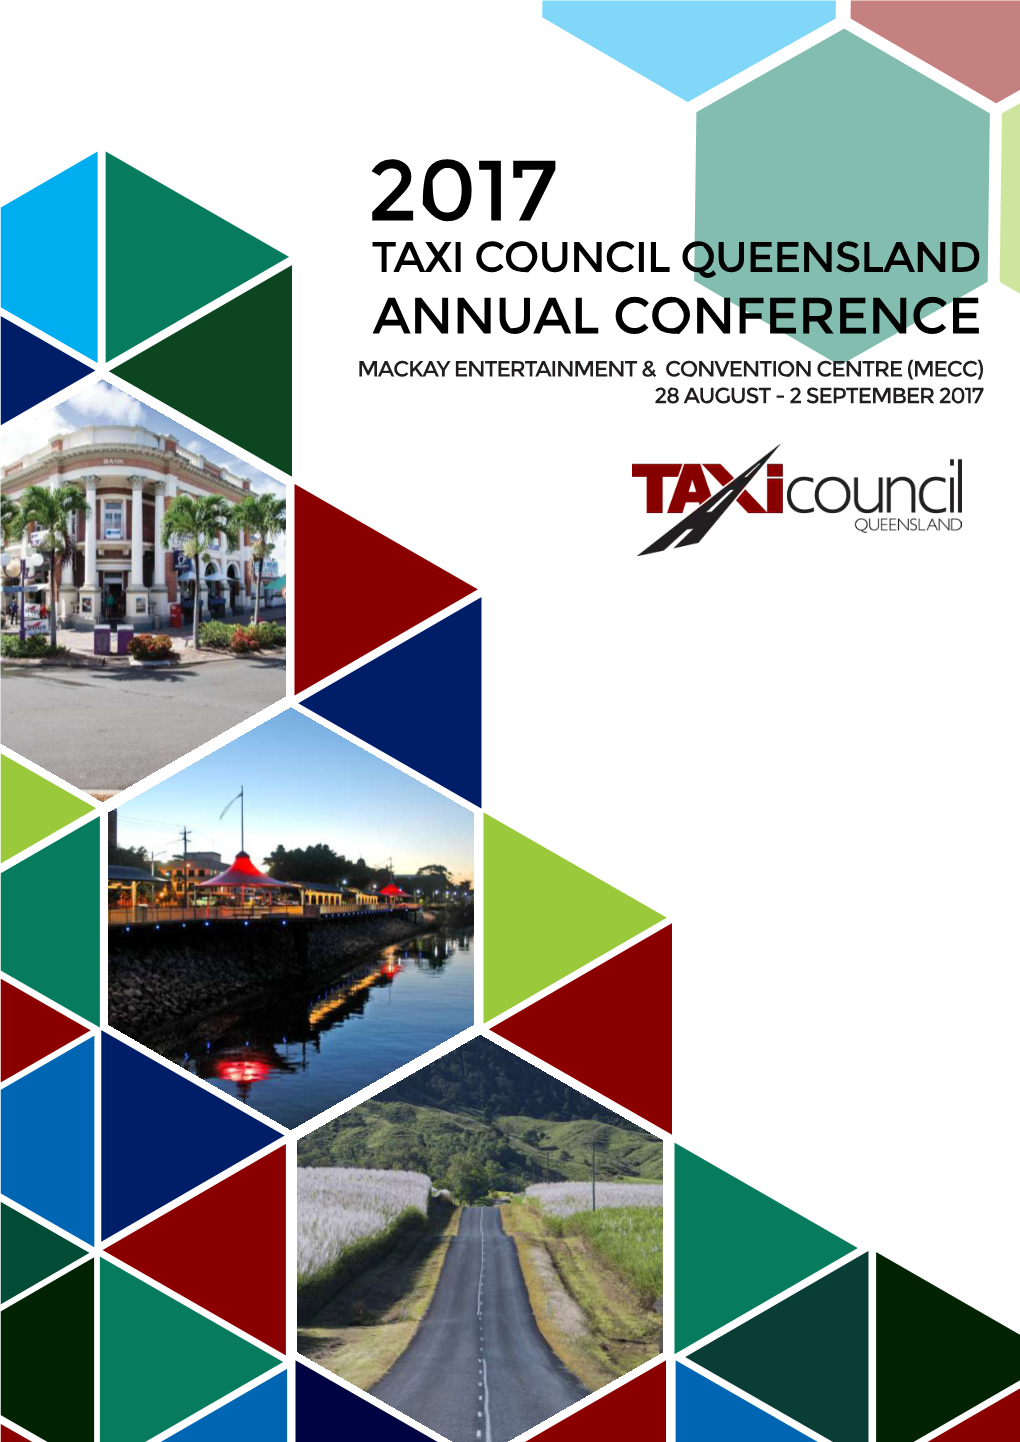 Annual Conference Mackay Entertainment & Convention Centre (Mecc) 28 August - 2 September 2017 2017 Taxi Council Queensland Annual Conference